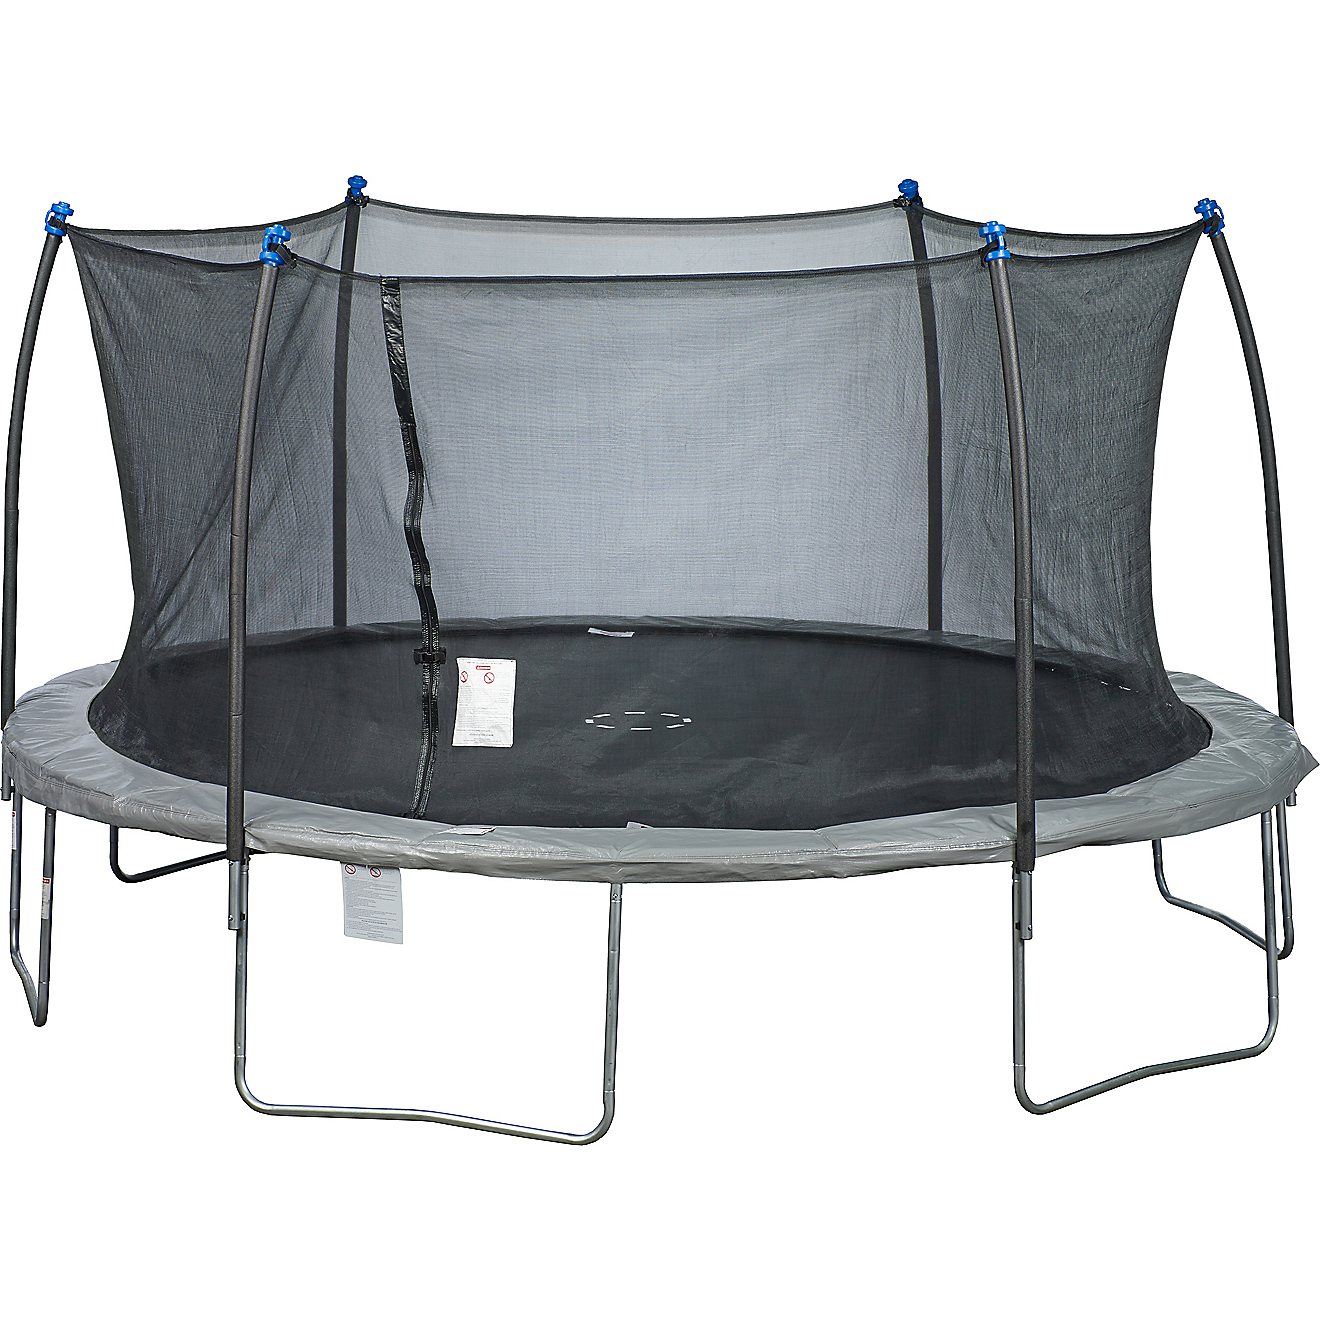 JumpZone Premium 15' x 17' Oval Trampoline with Enclosure Box 2 of 2                                                             - view number 2